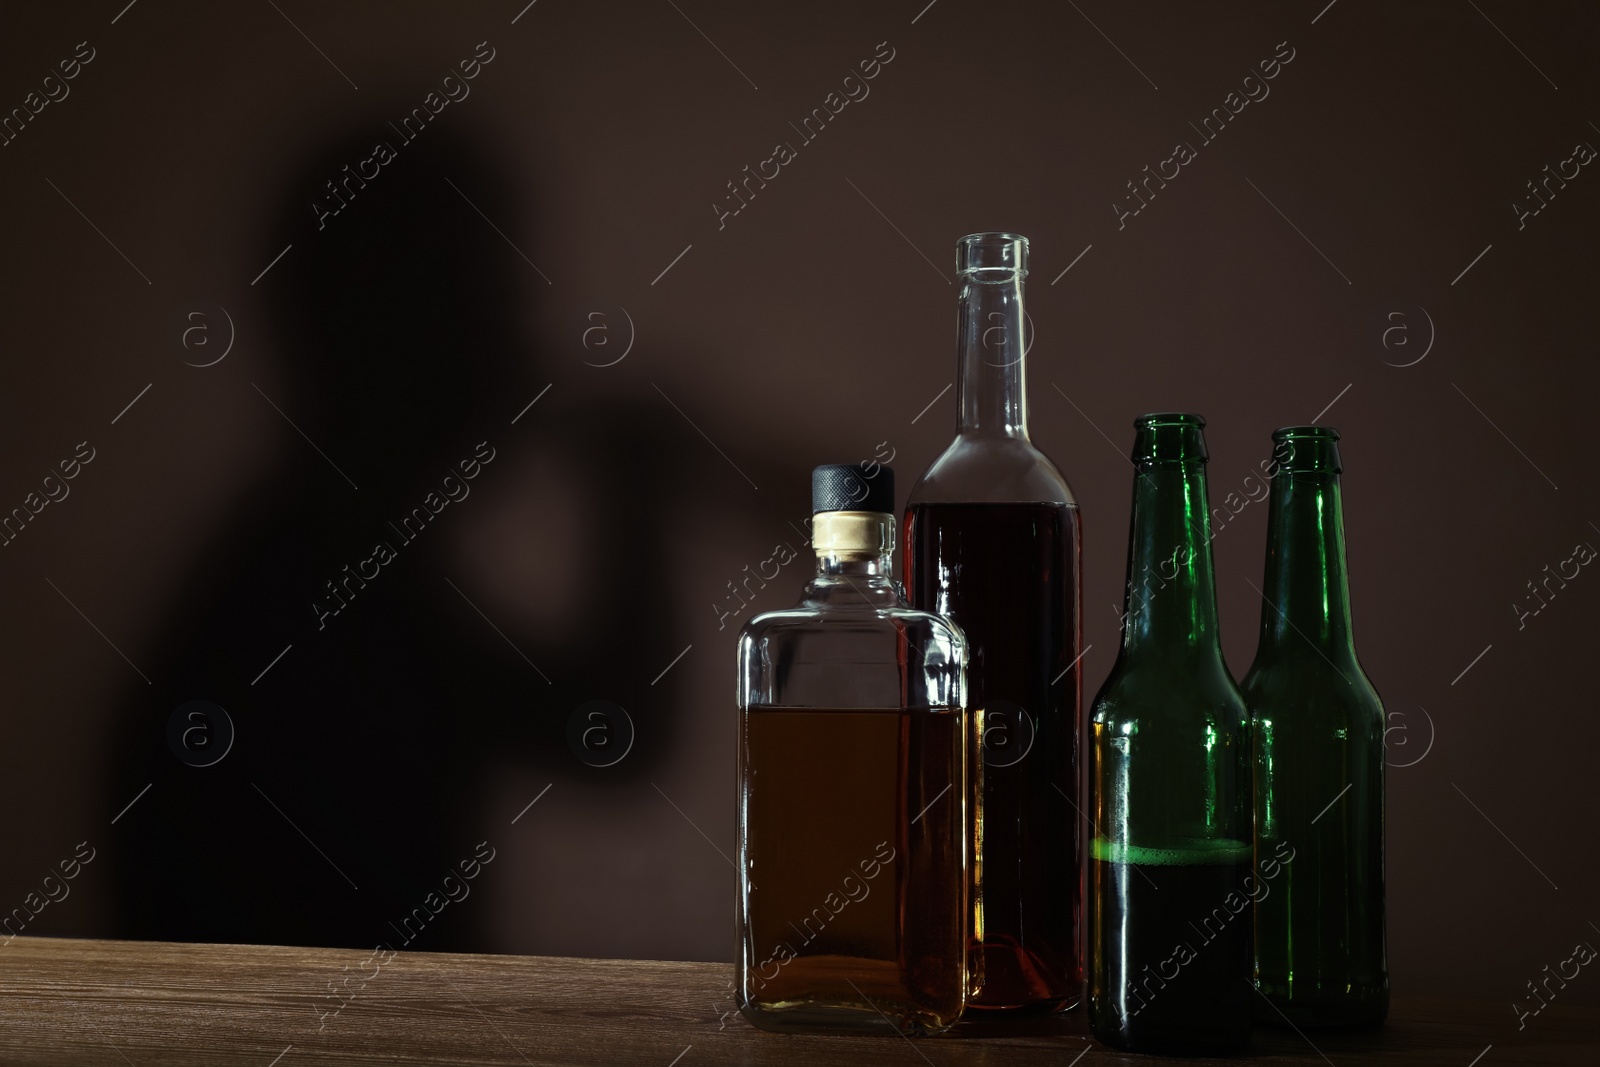 Photo of Alcoholic drinks on wooden table against brown wall with shadow of addicted man